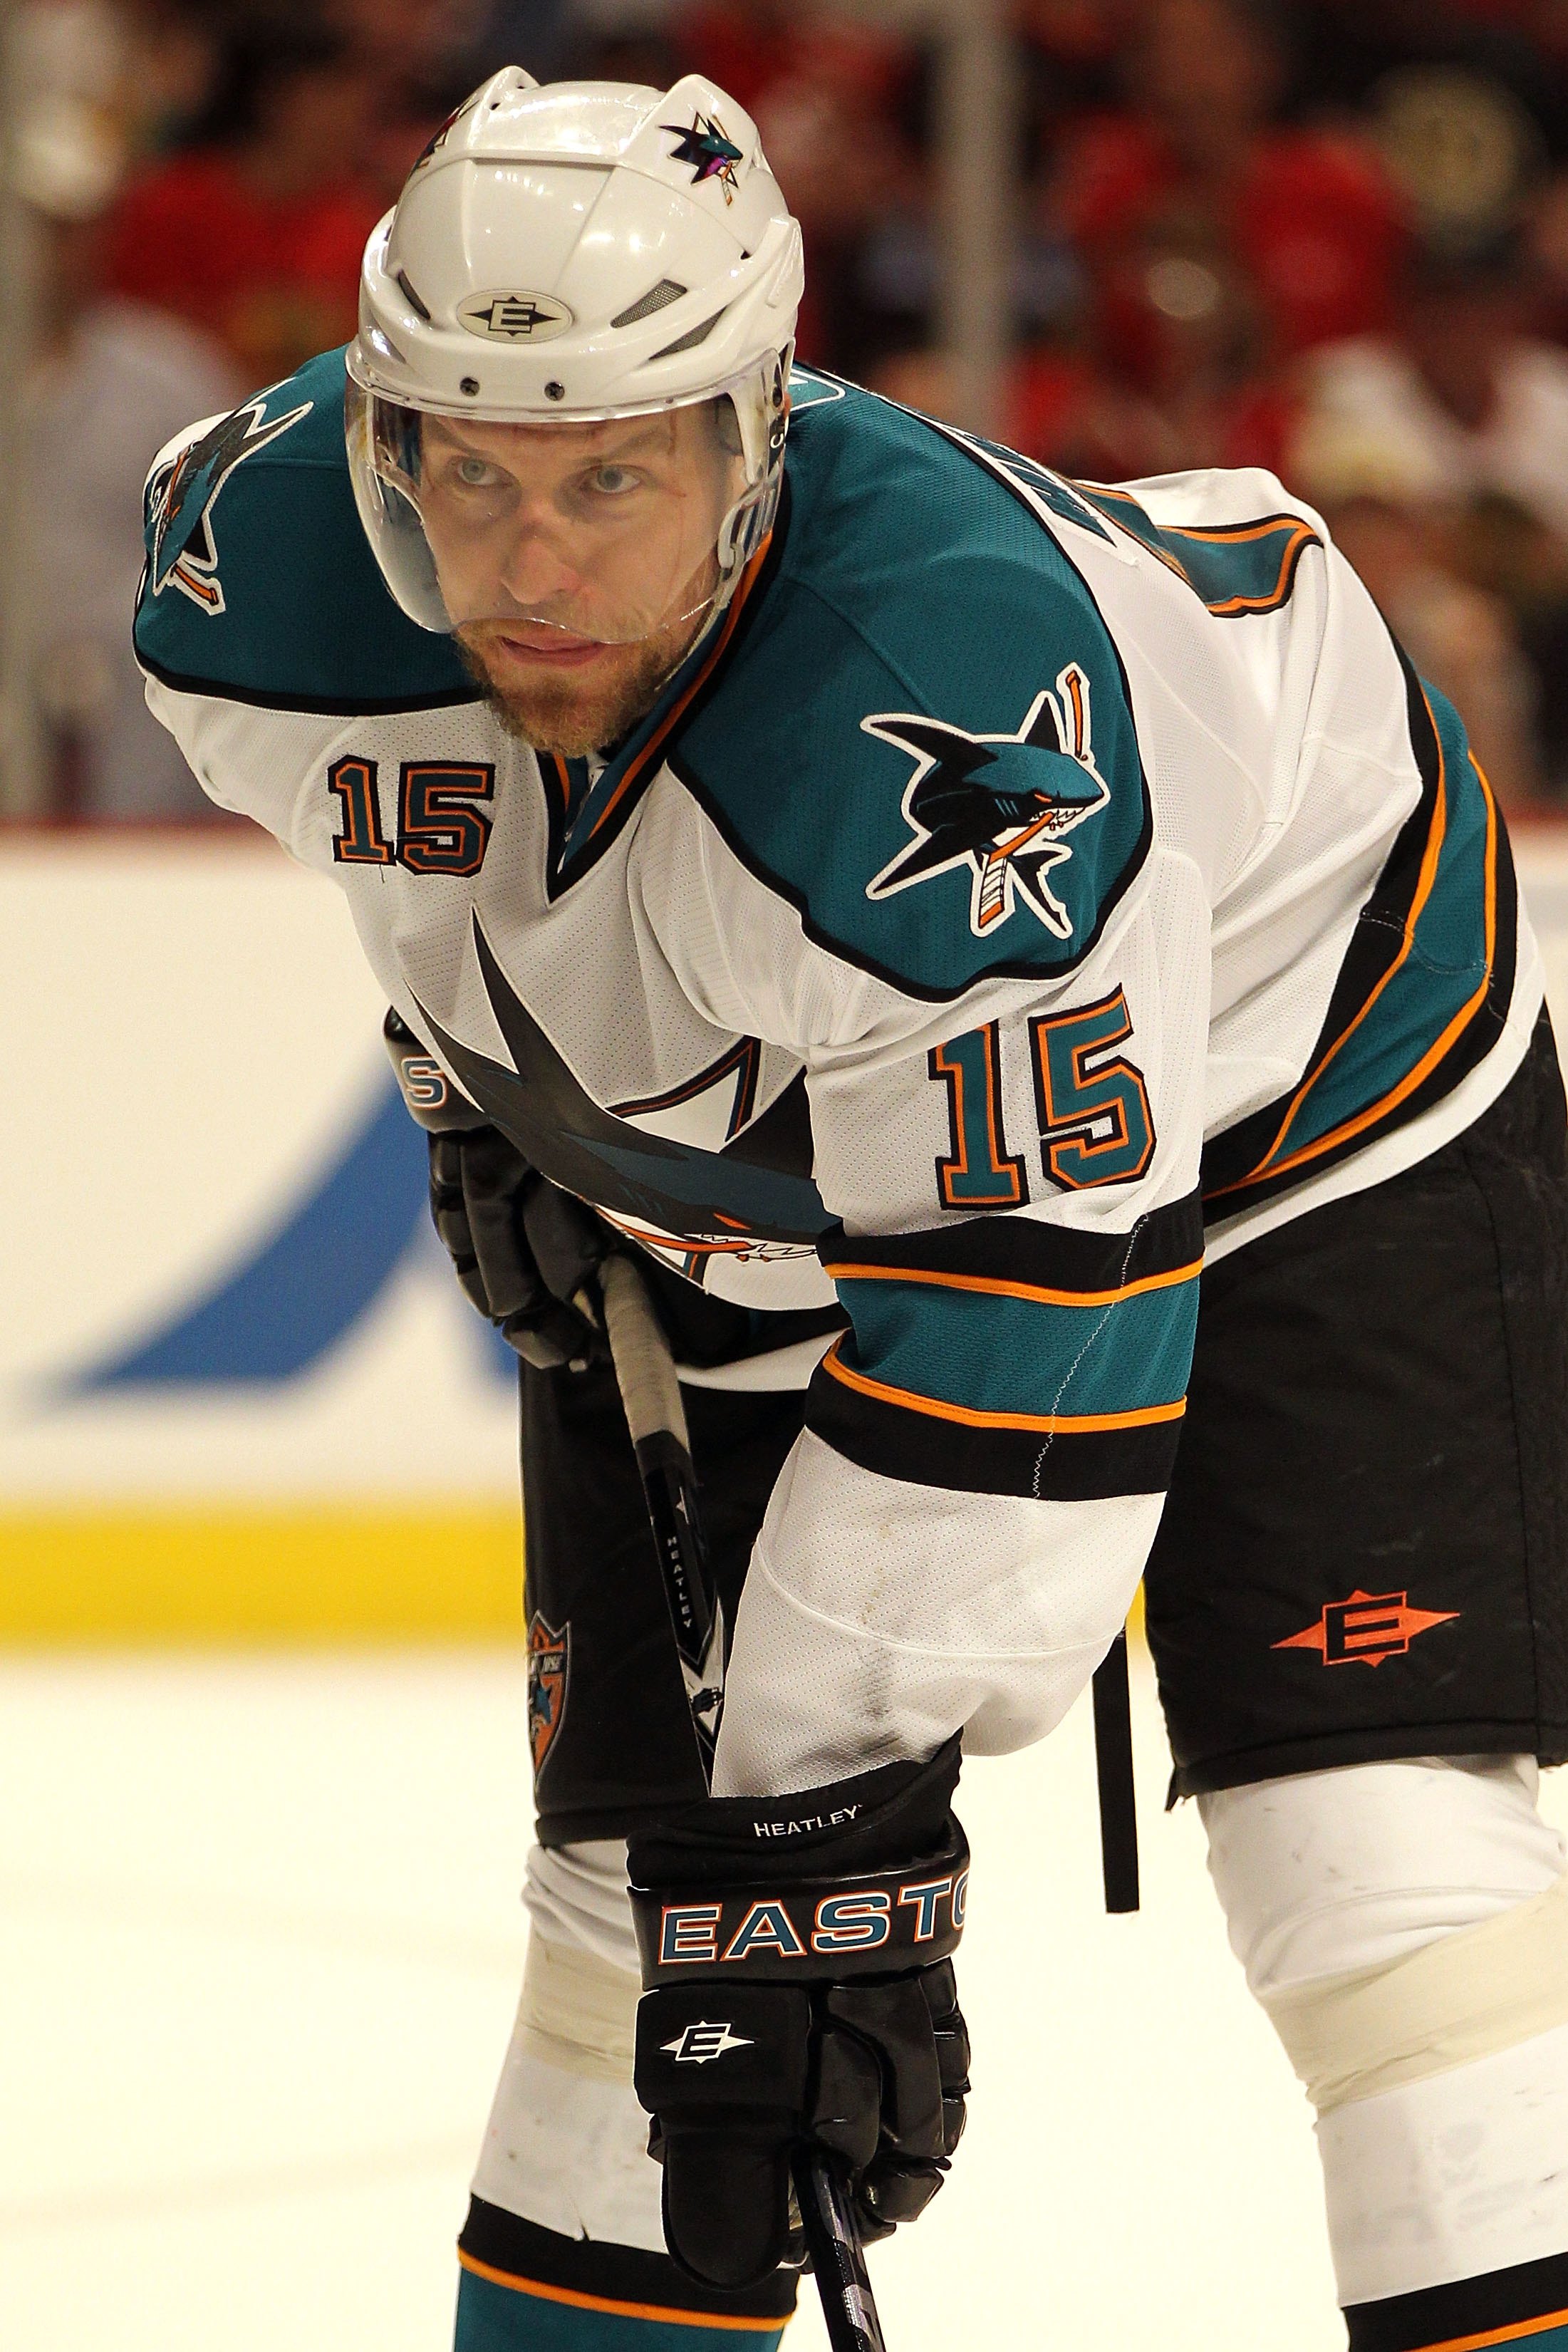 Dany Heatley goes away from tragedy - Taipei Times